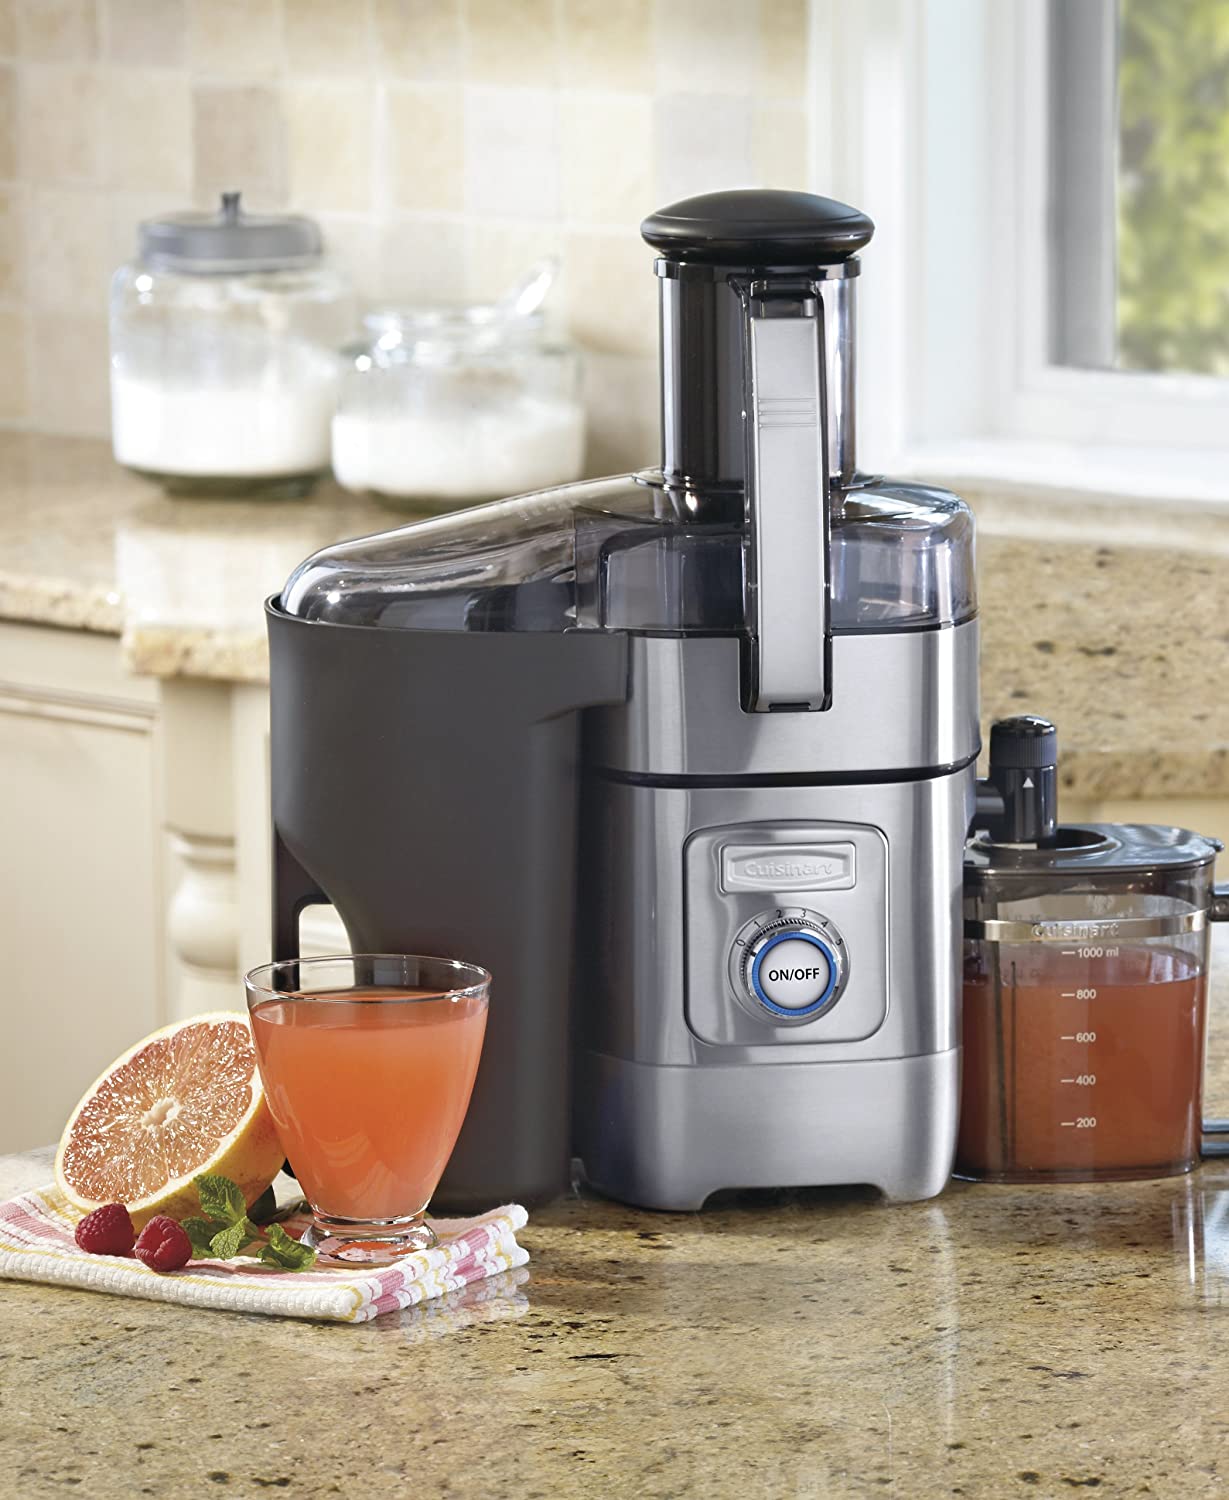 Guide to Cuisinart Juicers